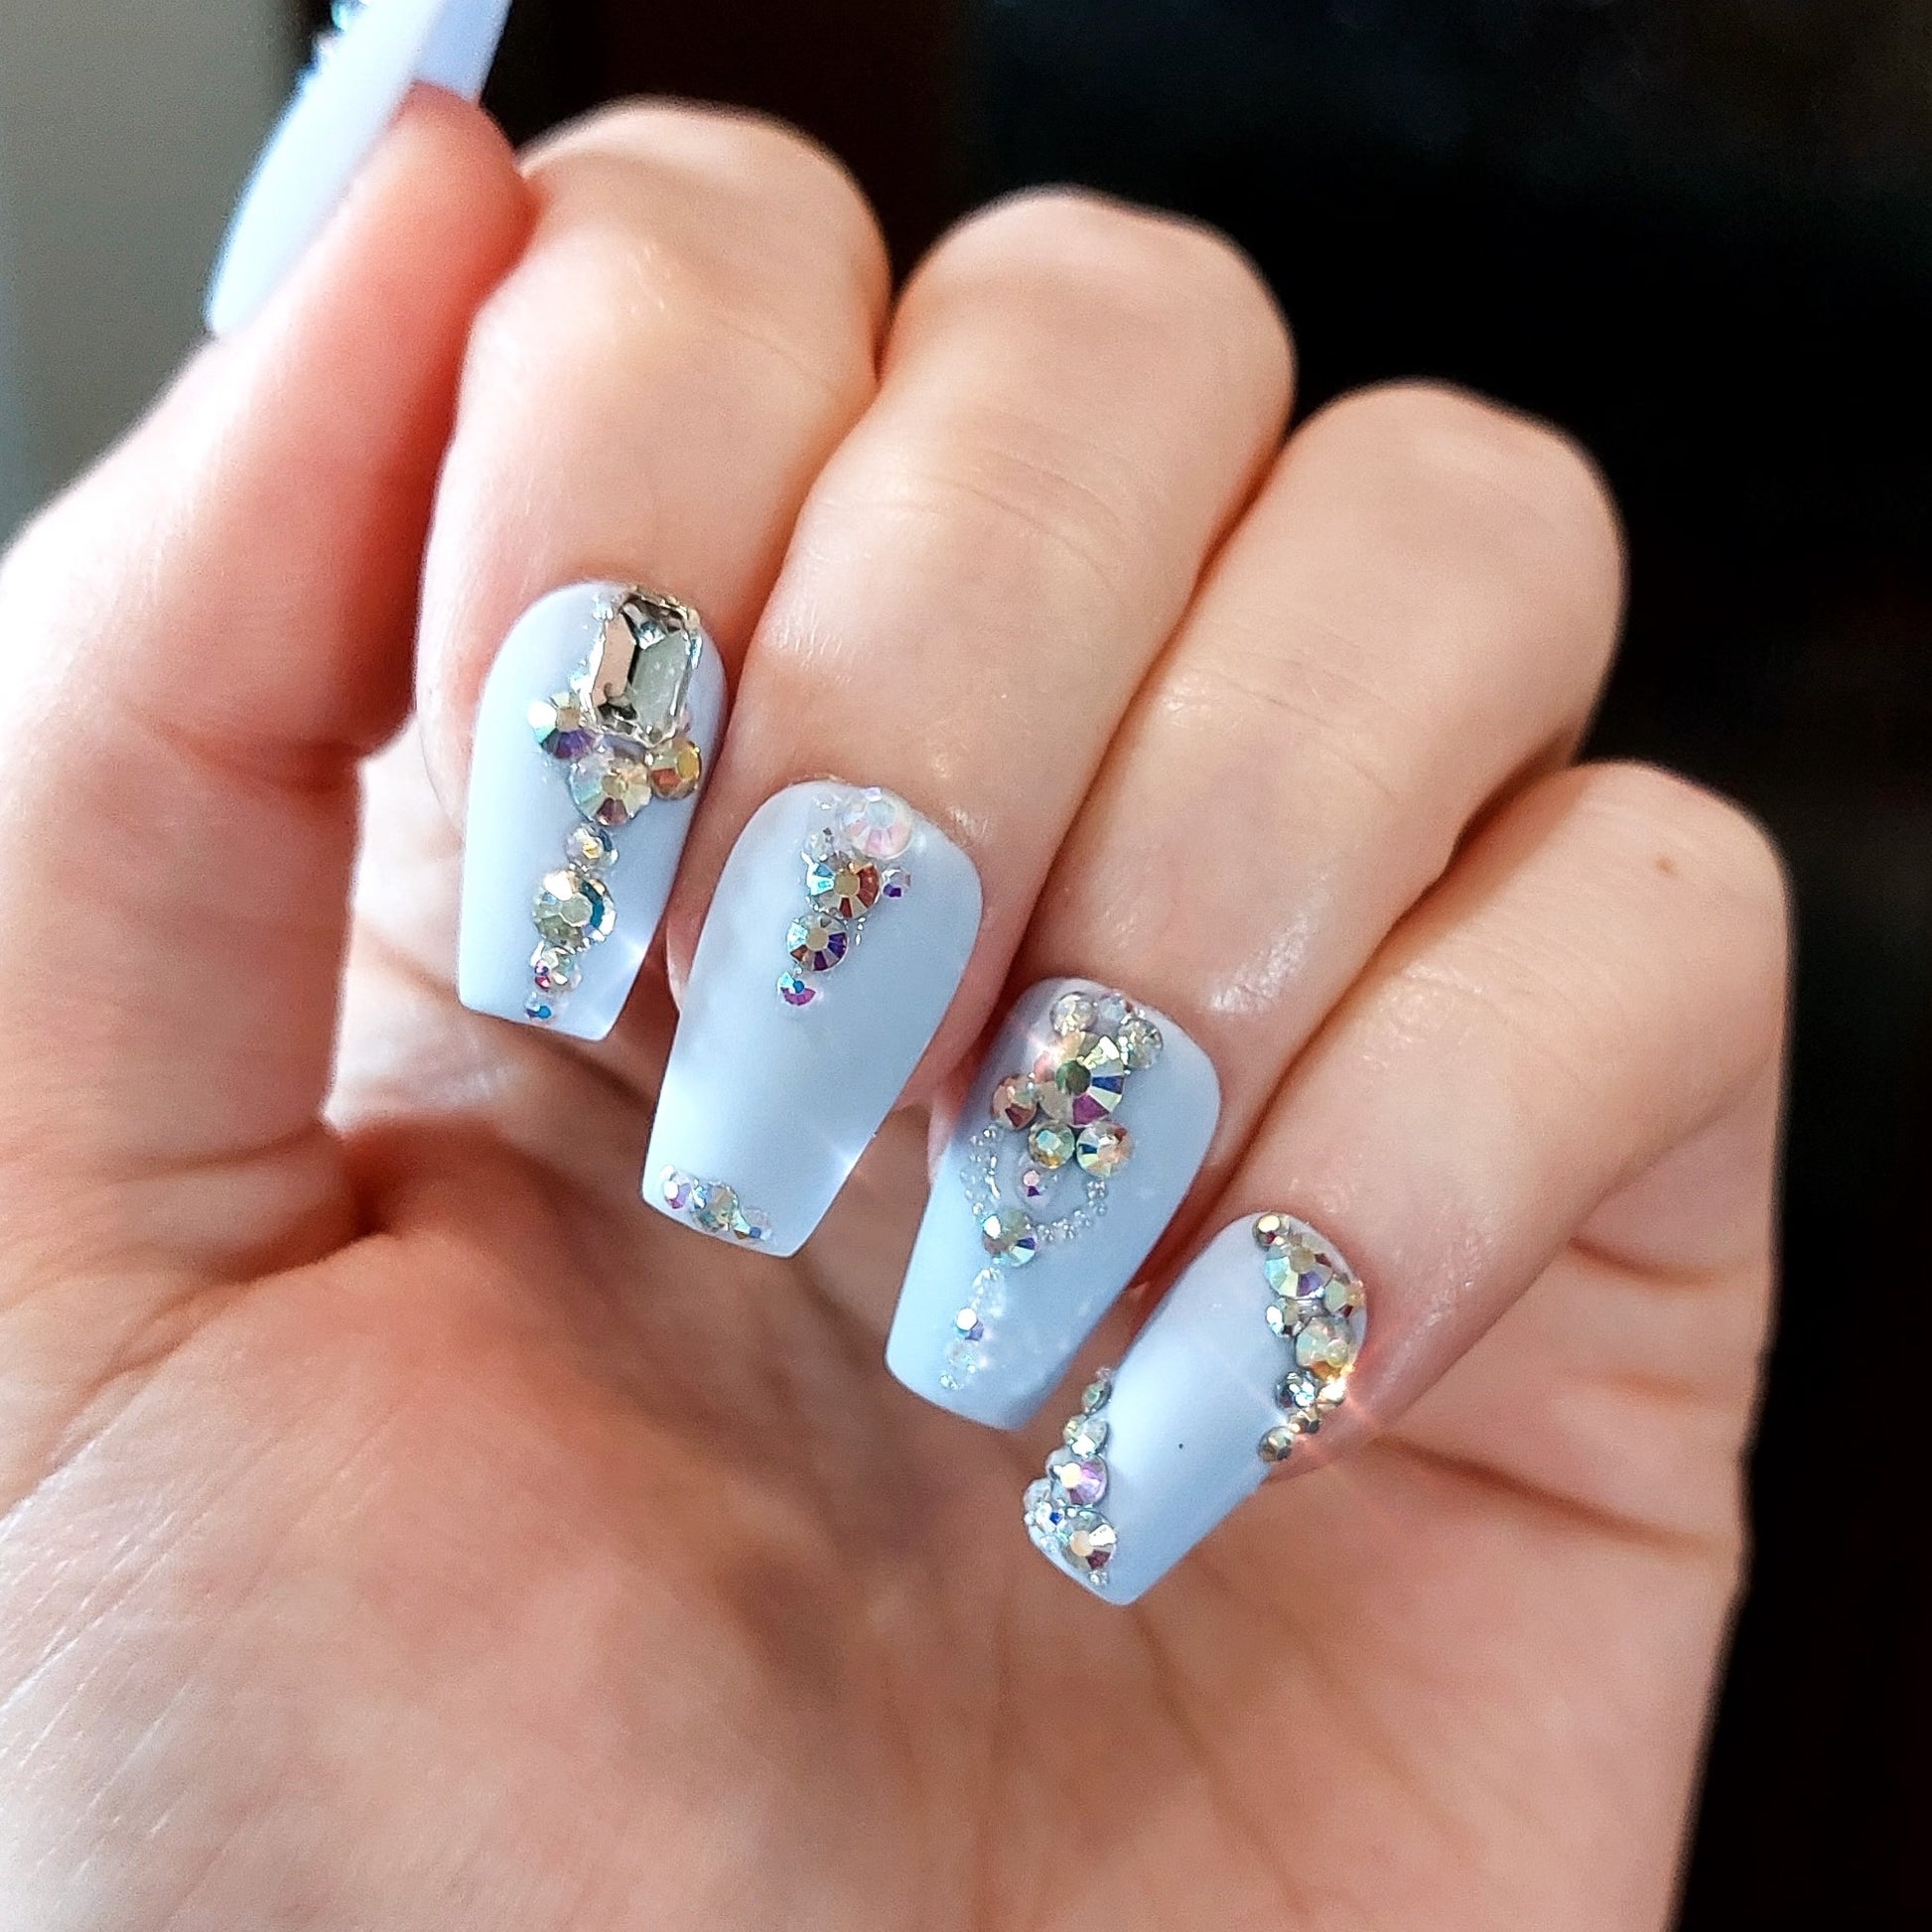 Periwinkle press on nails with a variety of crystals on a short coffin nail shape.